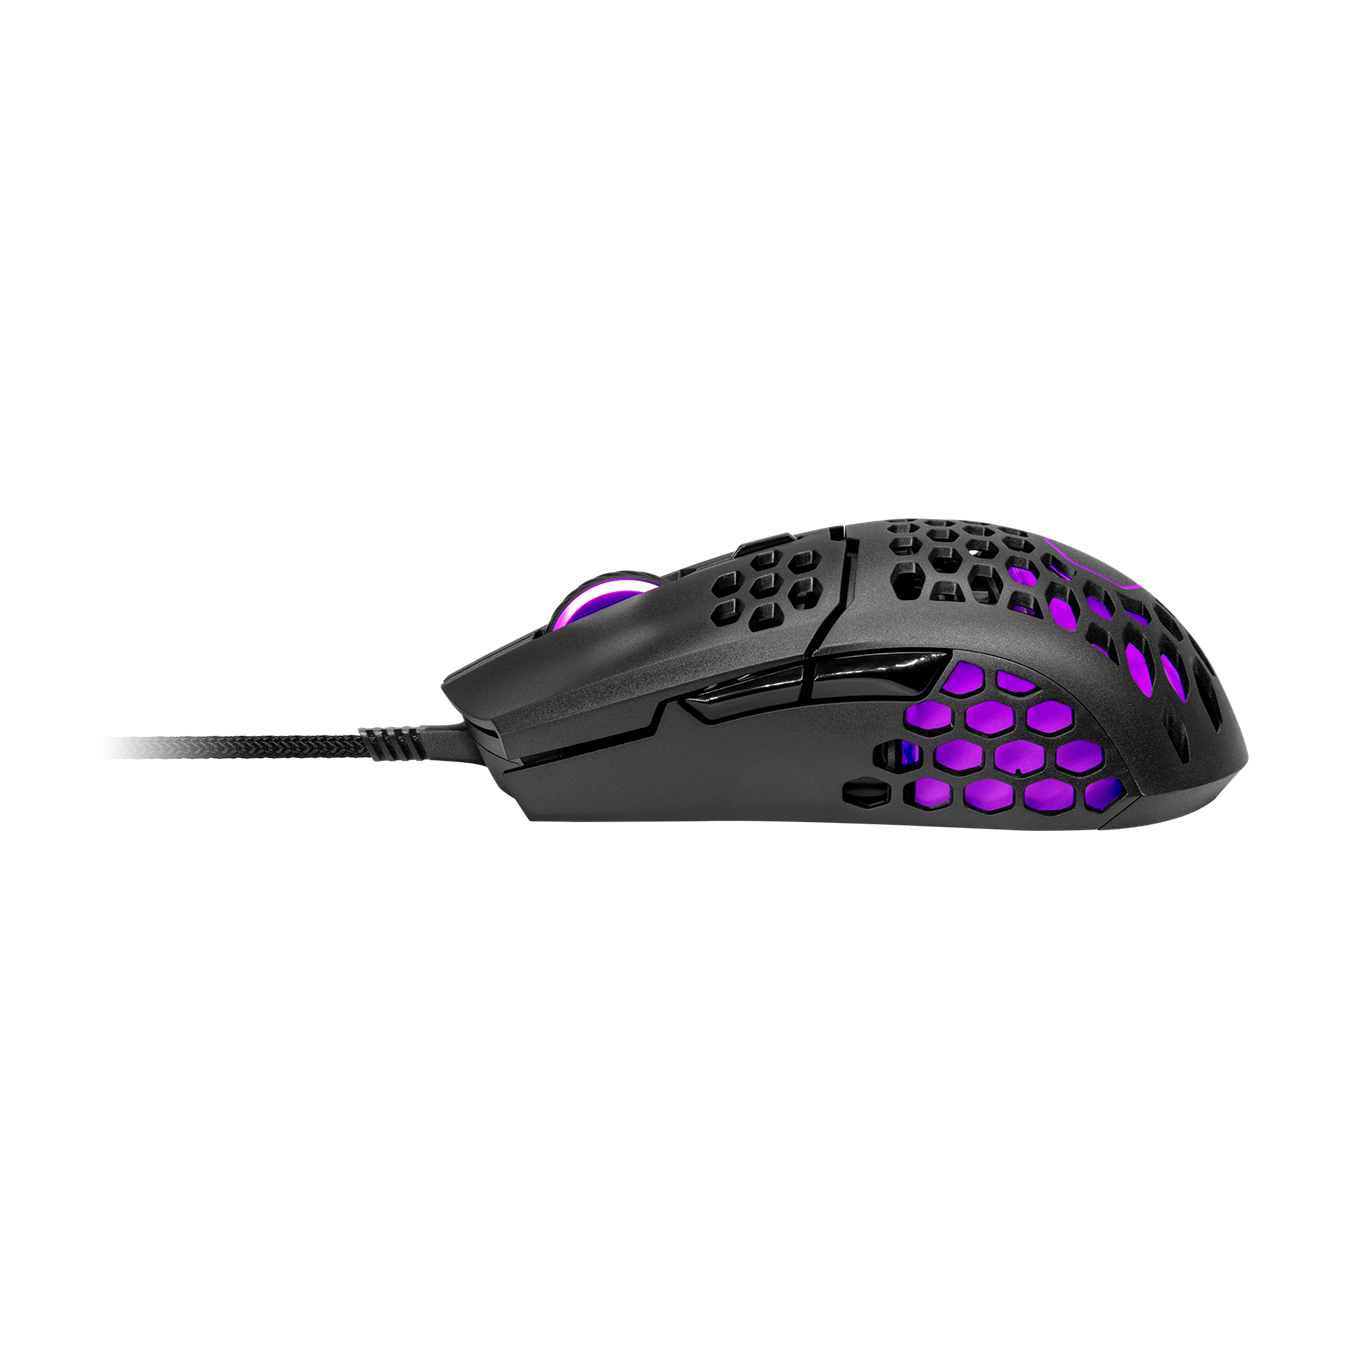 MM711 LITE Gaming Mouse - An ambidextrous shape for right-handed gamers with two side buttons